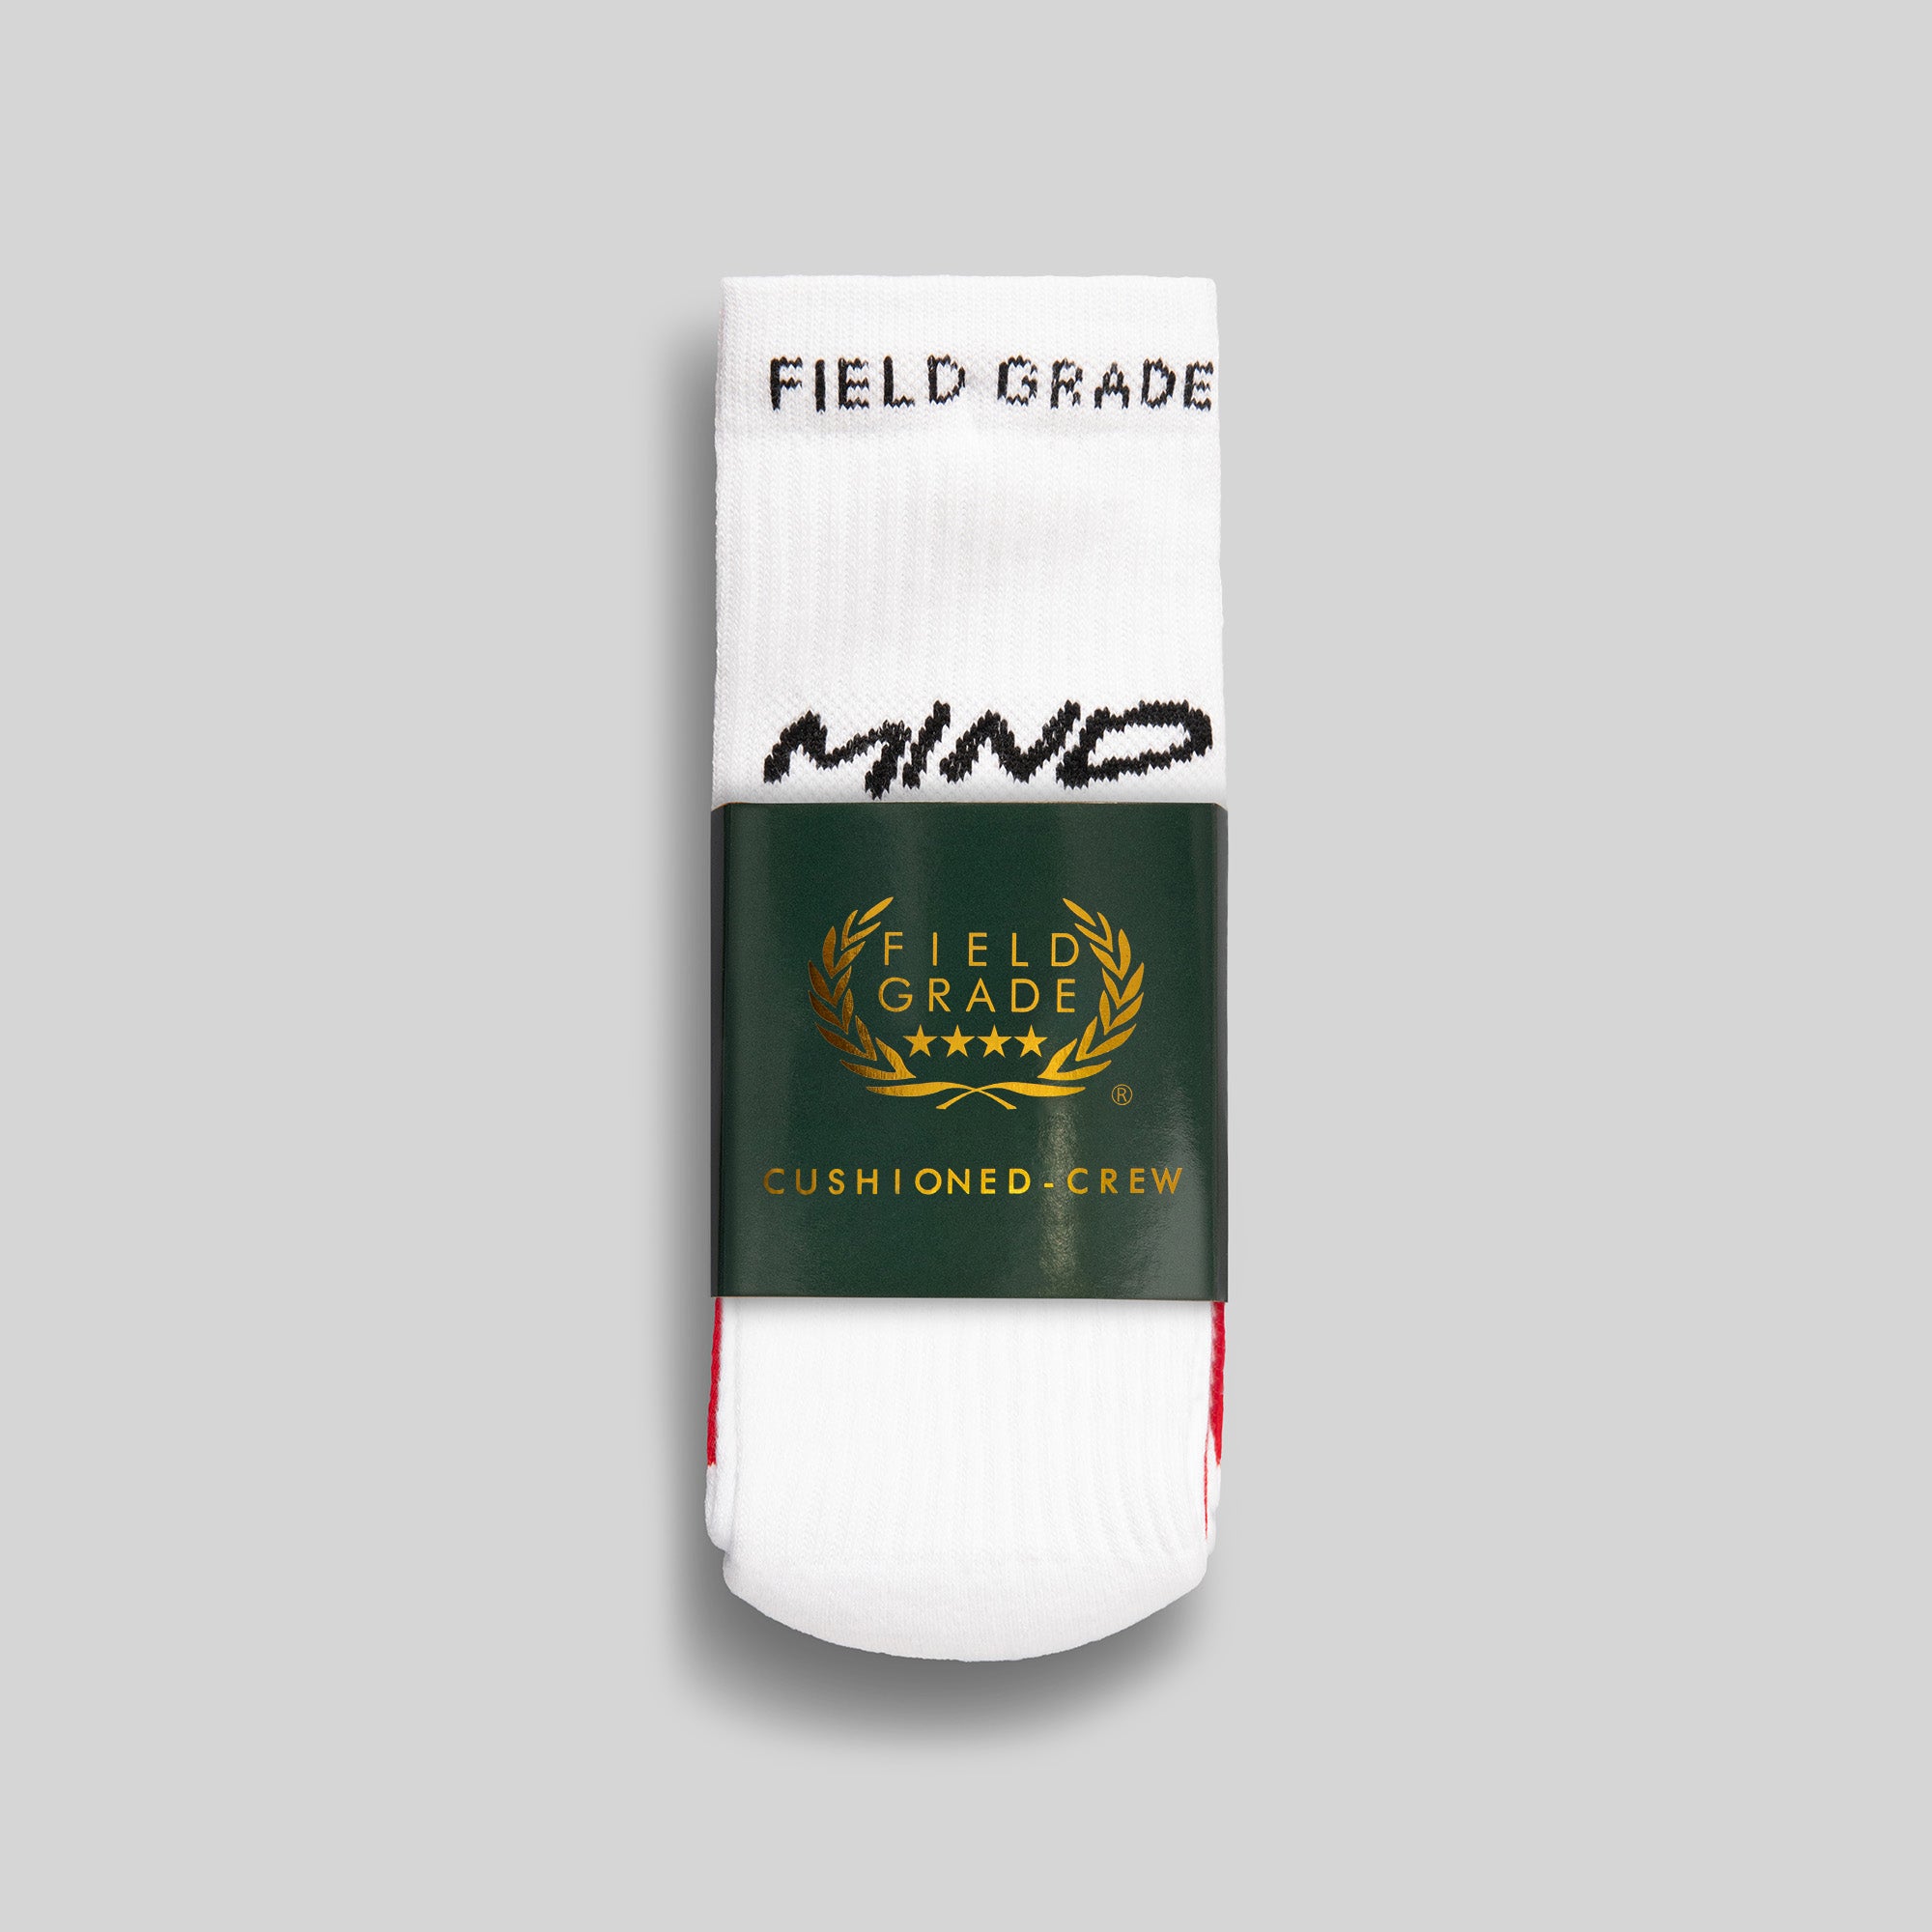 FIELD GRADE CUSHIONED CREW SOCKS - MIND YOUR BUSINESS WHITE PACK